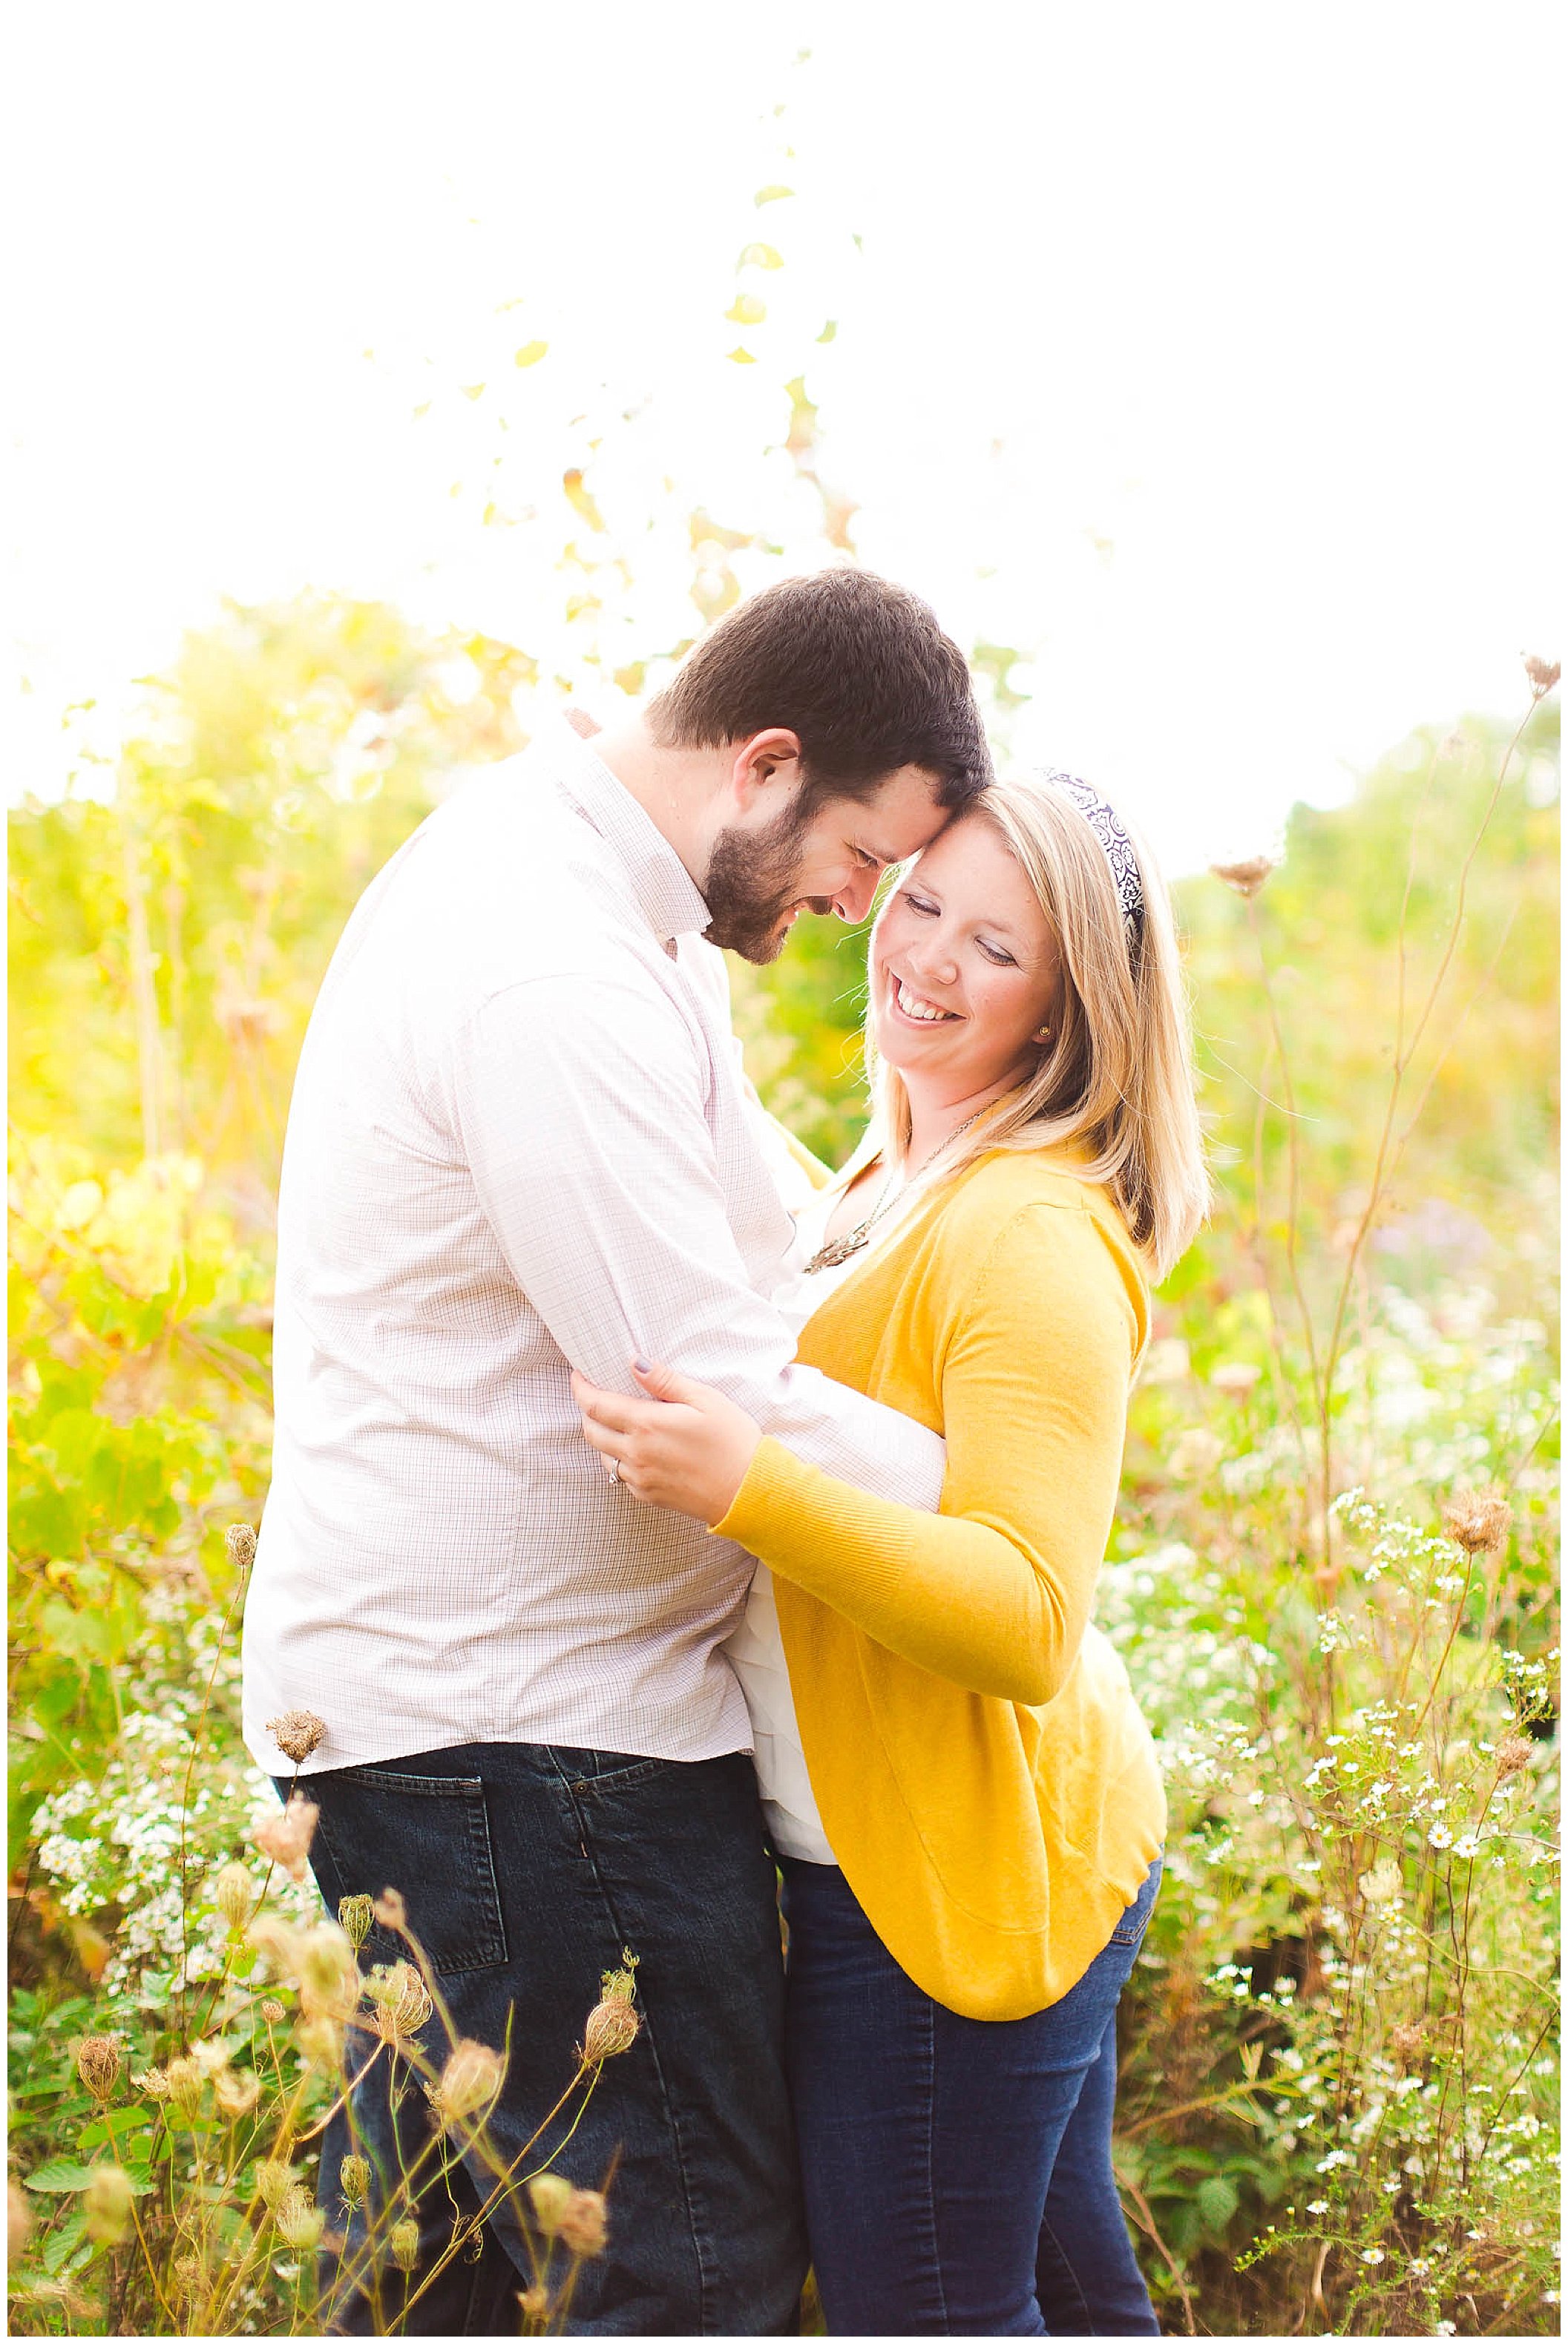 Sunshine filled engagement session in a field of wildflowers, Fort Wayne Indiana Wedding Photographer_0022.jpg